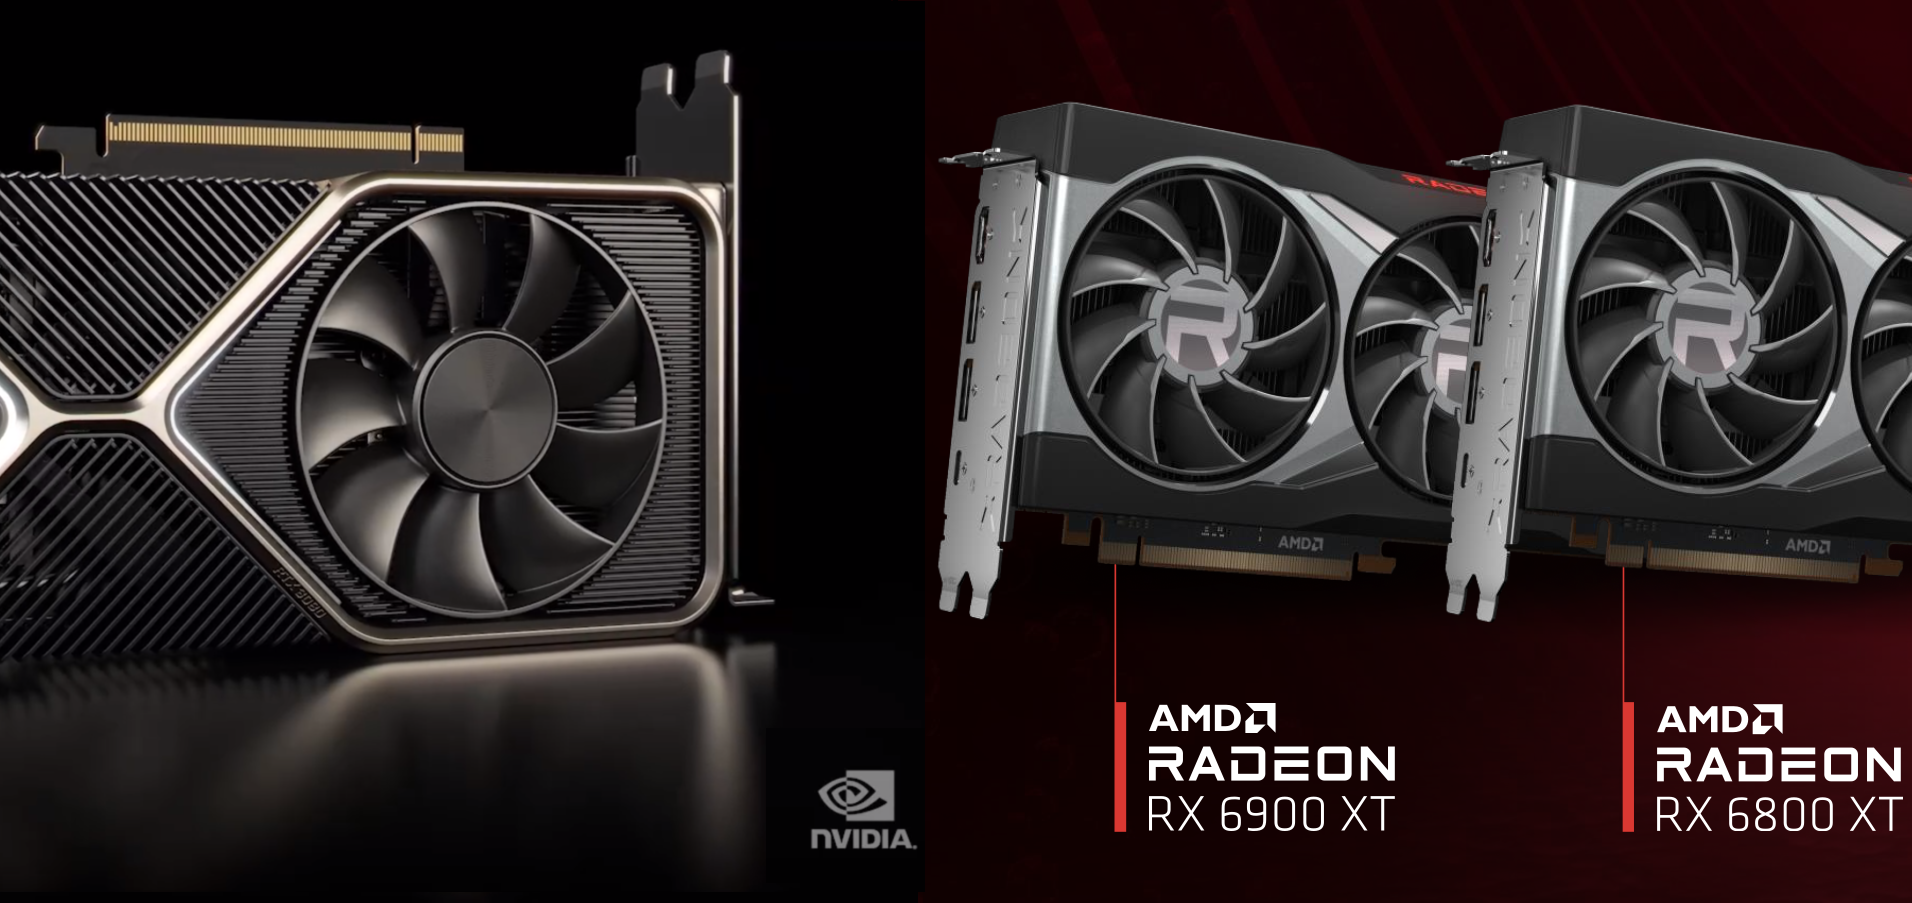 RTX 3000 Series GPUs and AMD Radeon RX 6000 restocks on Black Friday? RTX 3000 Series Available for Purchase Now! | PC Gaming Black Friday Deals – Ultragamerz, The best Technology & game news